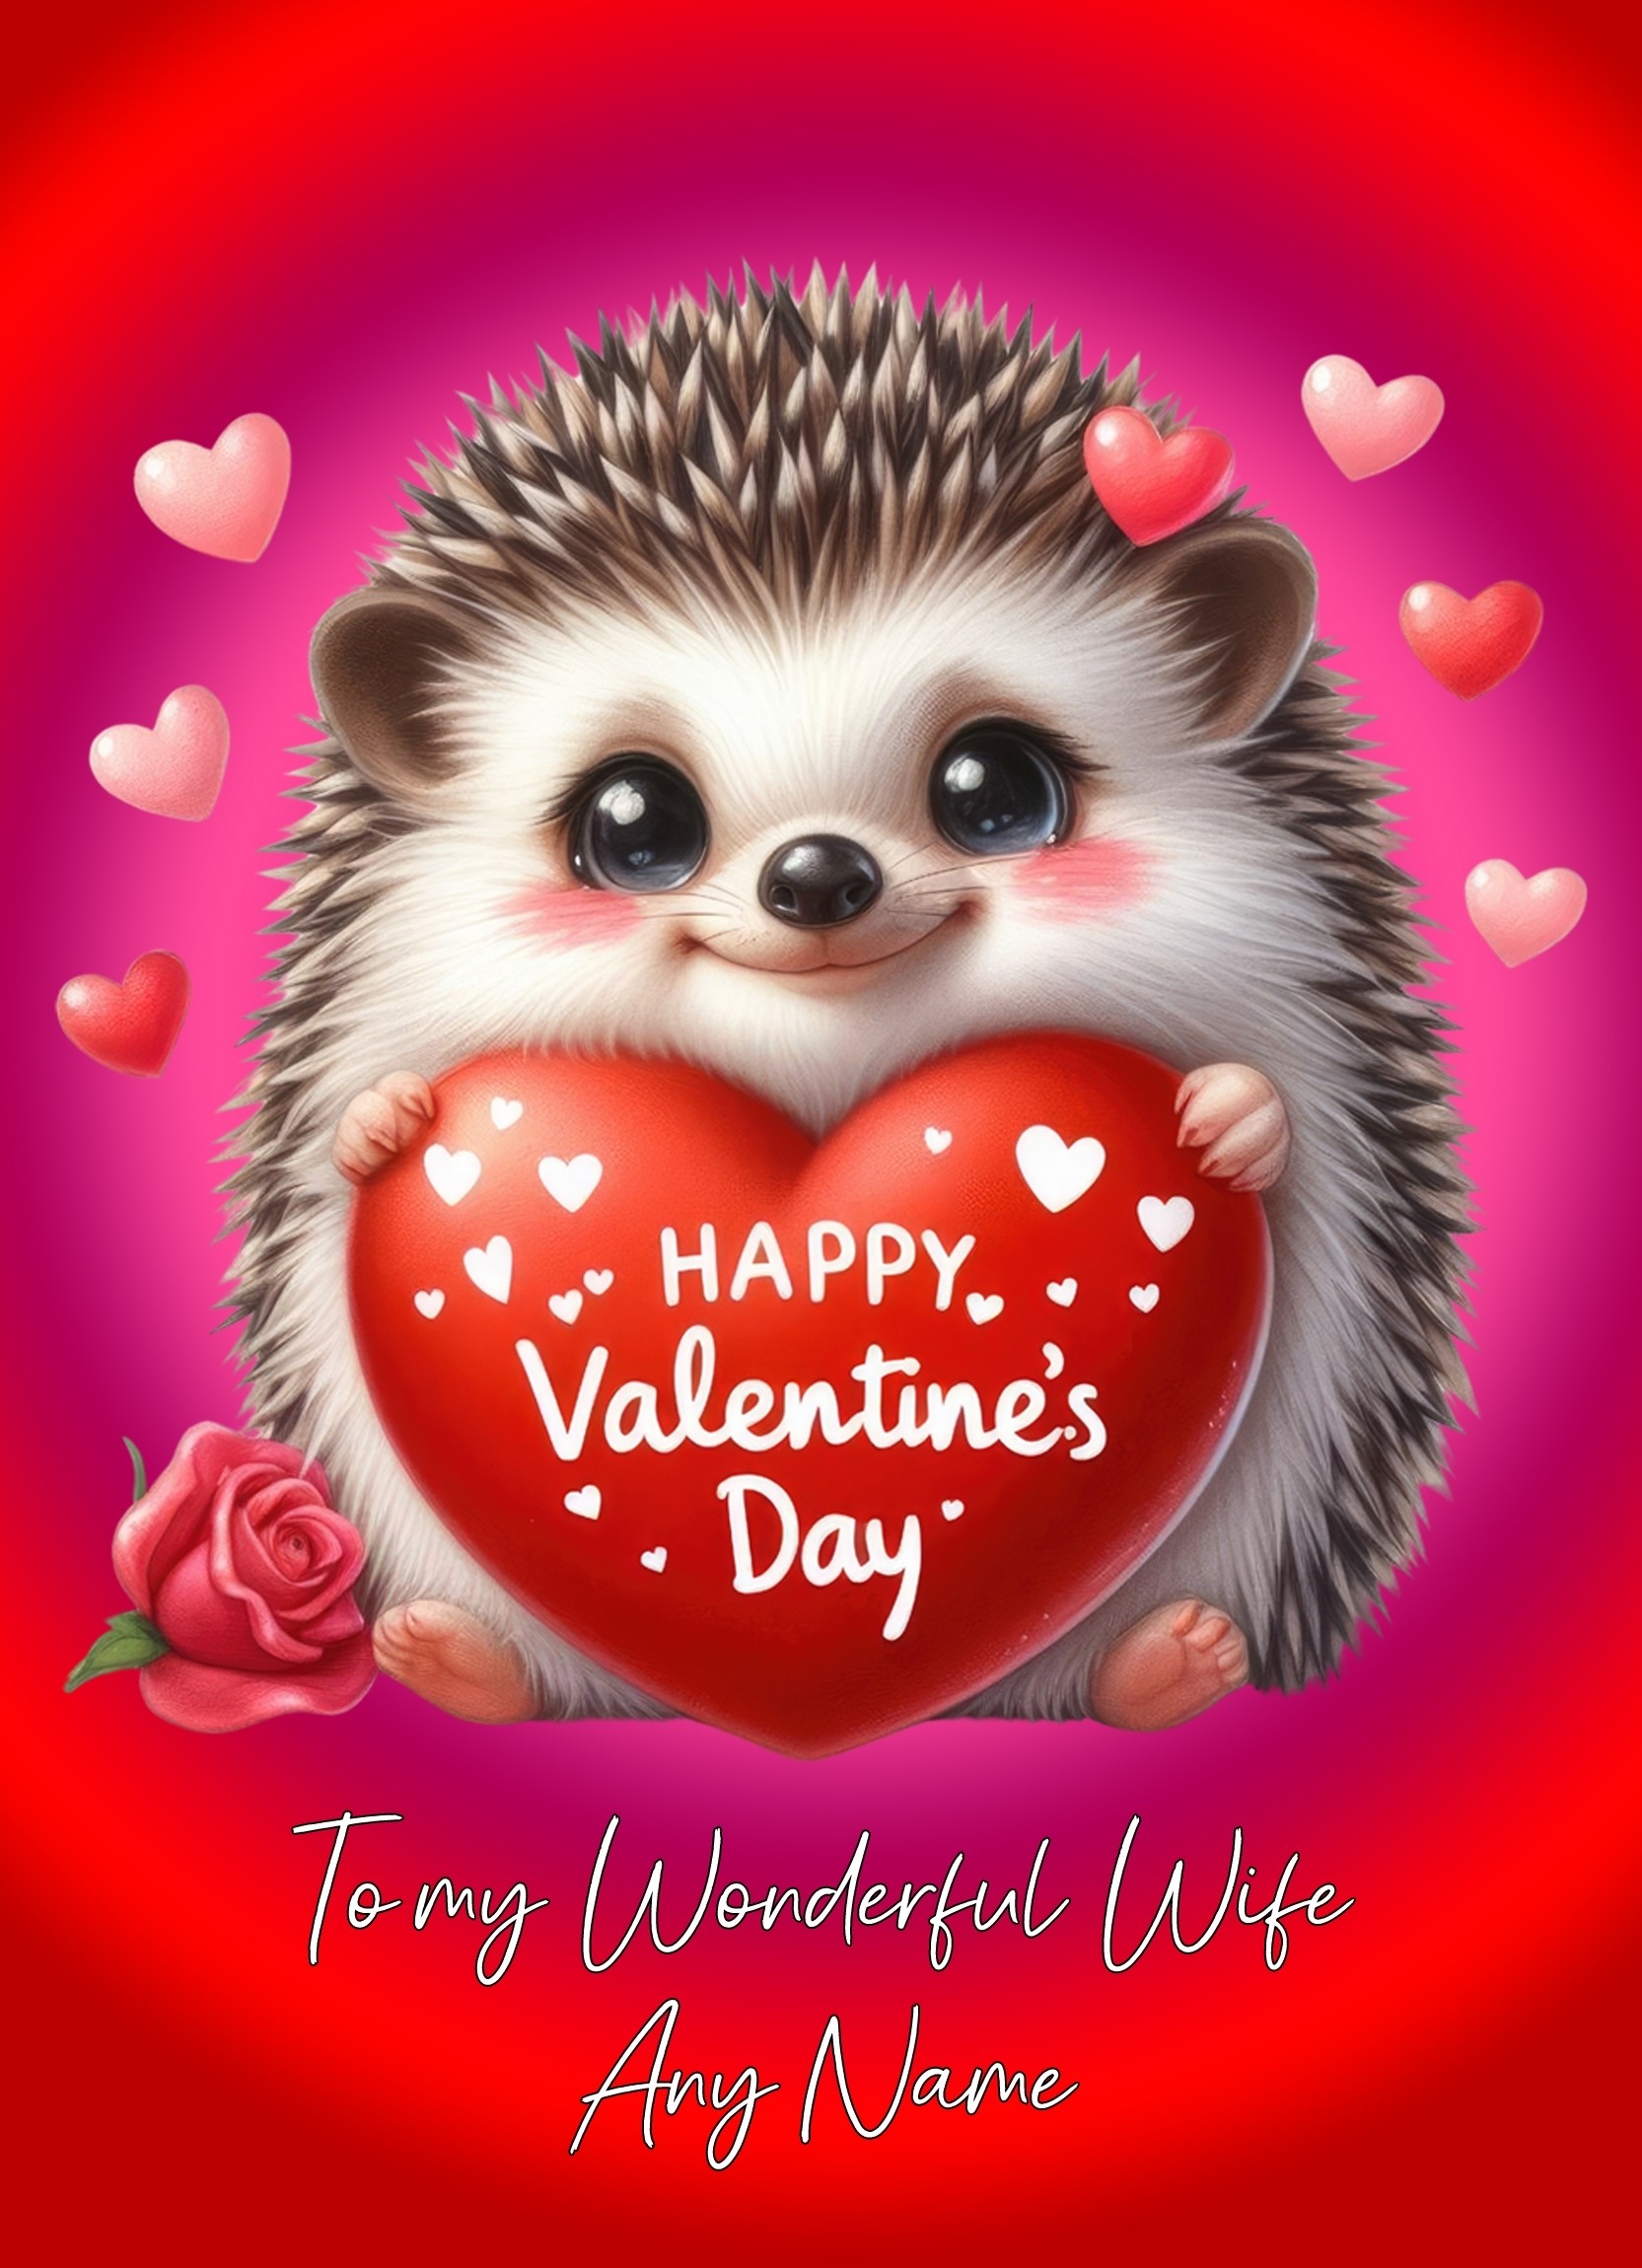 Personalised Valentines Day Card for Wife (Hedgehog)